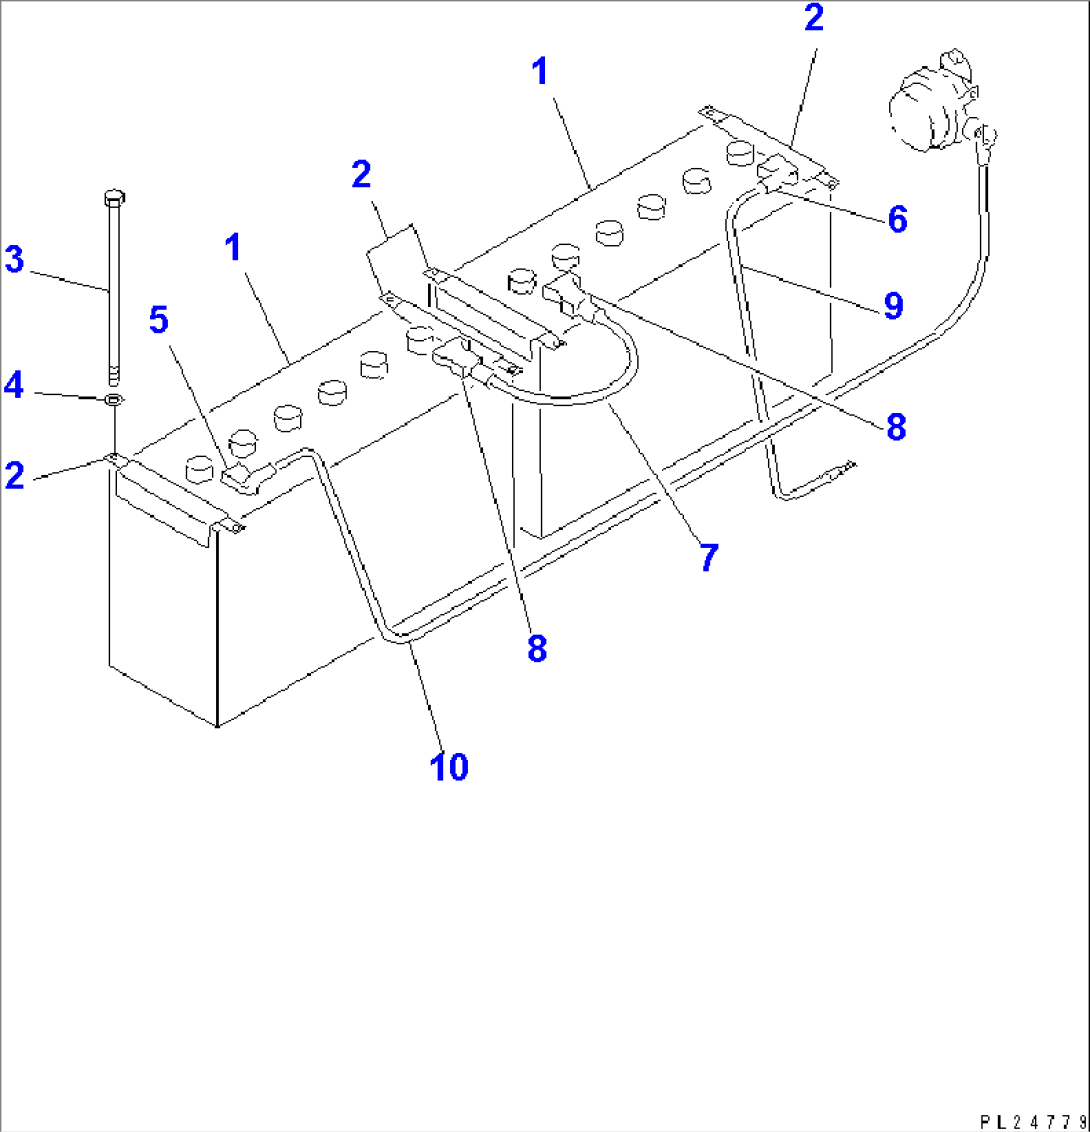 ELECTRICAL SYSTEM (3/9) (BATTERY)